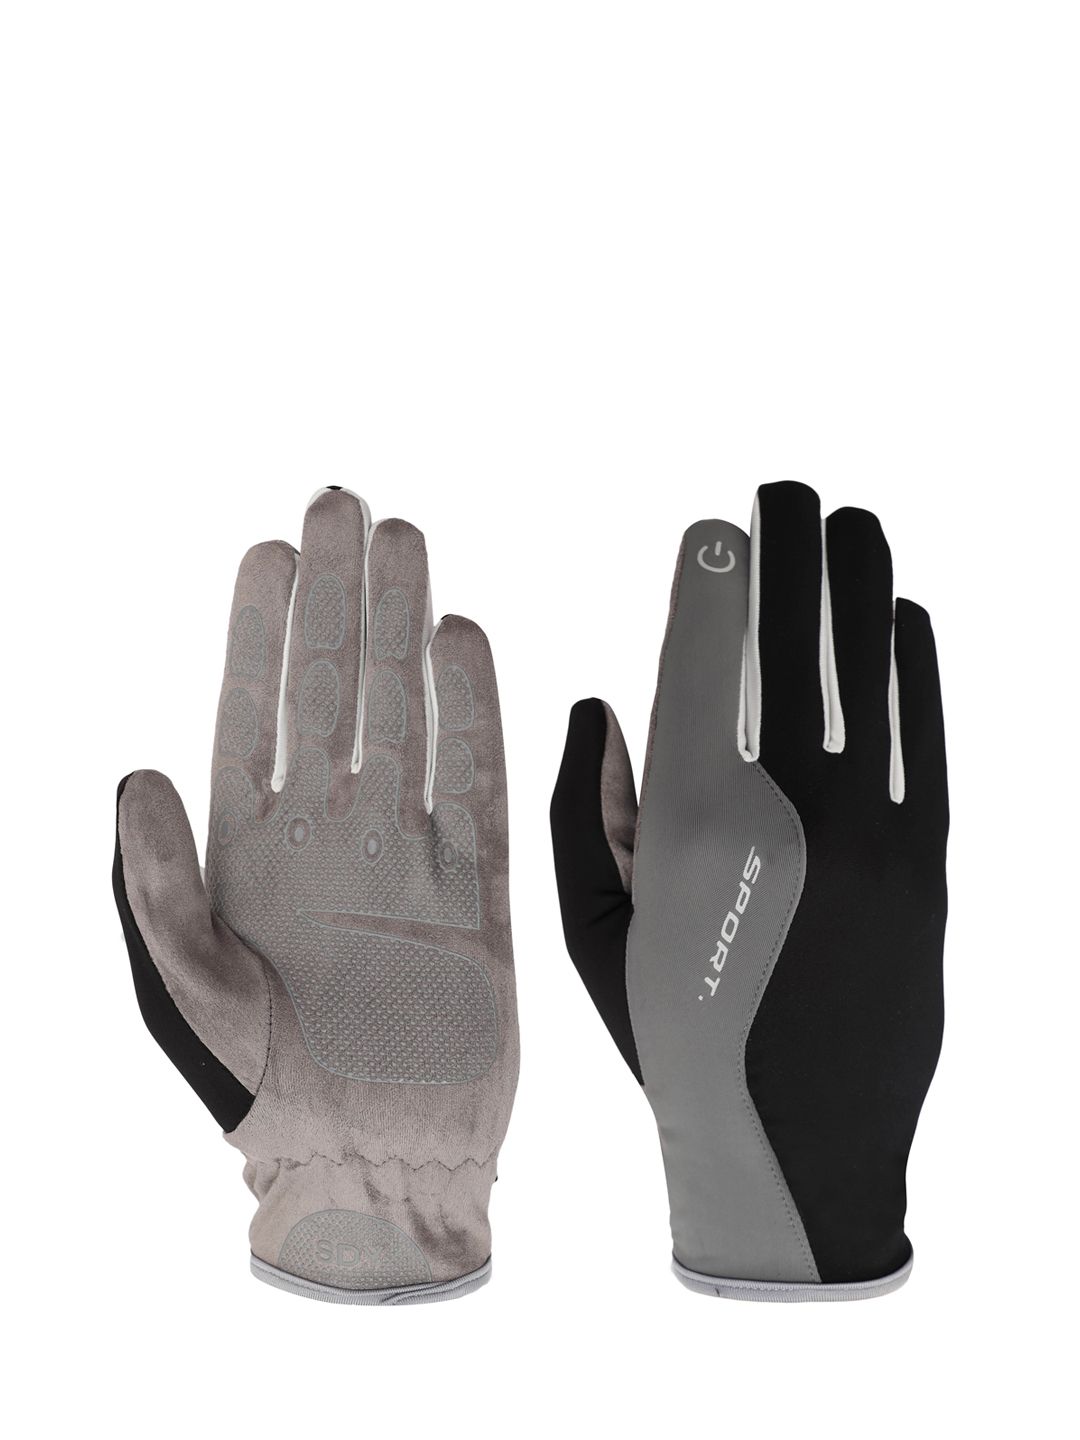 FabSeasons Unisex Black Patterned Cycling Gloves Price in India